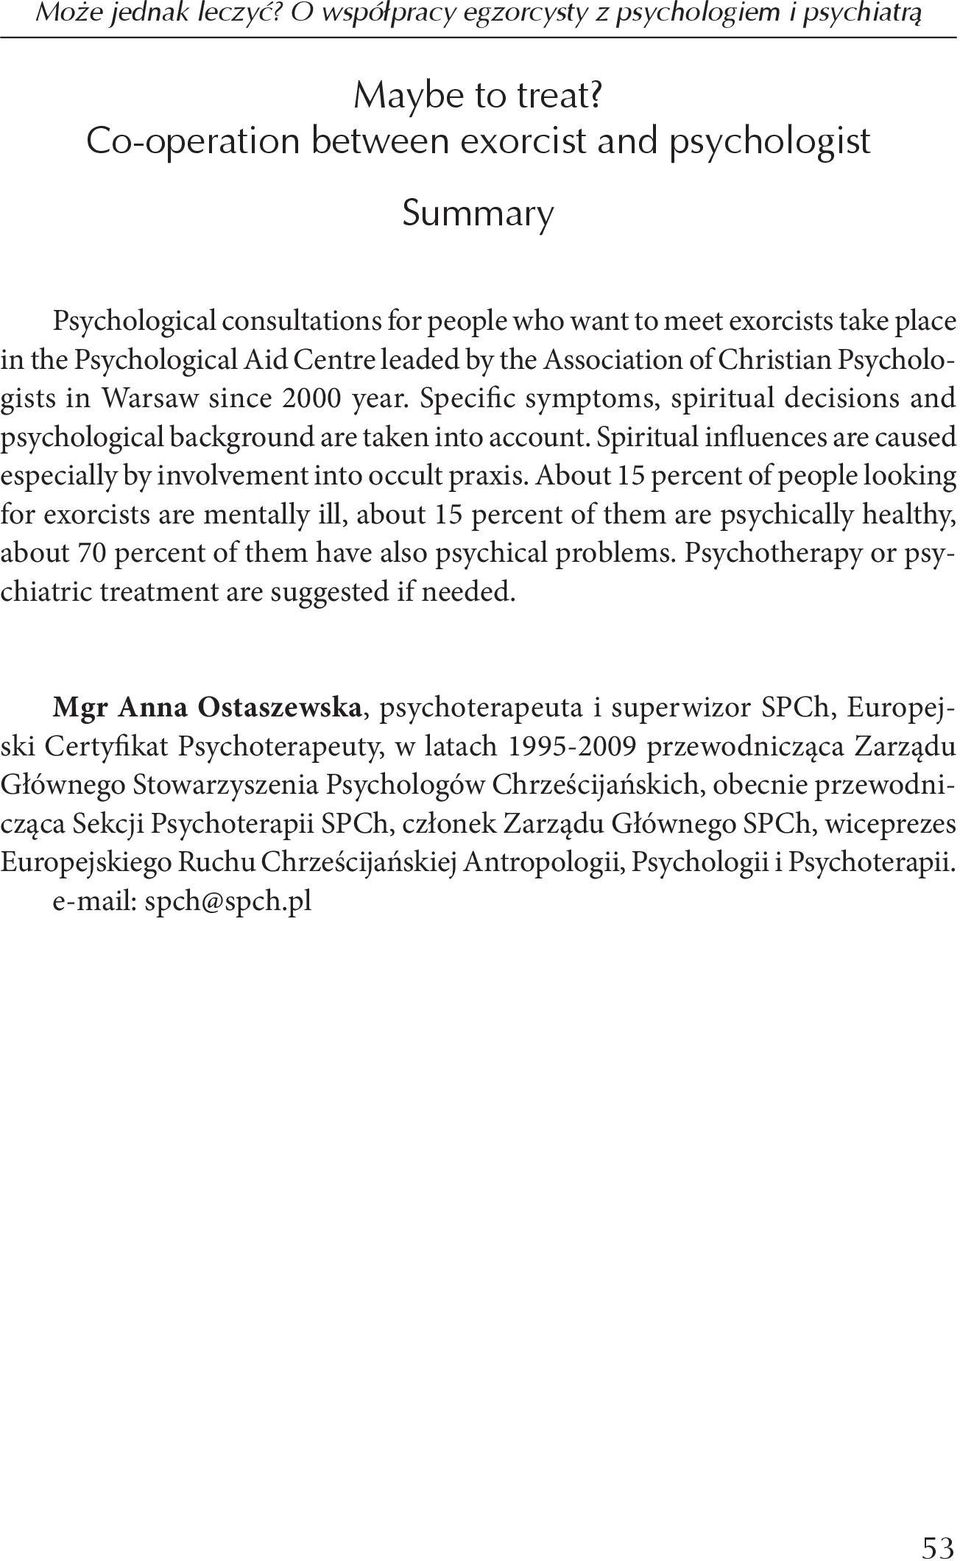 Christian Psychologists in Warsaw since 2000 year. Specific symptoms, spiritual decisions and psychological background are taken into account.